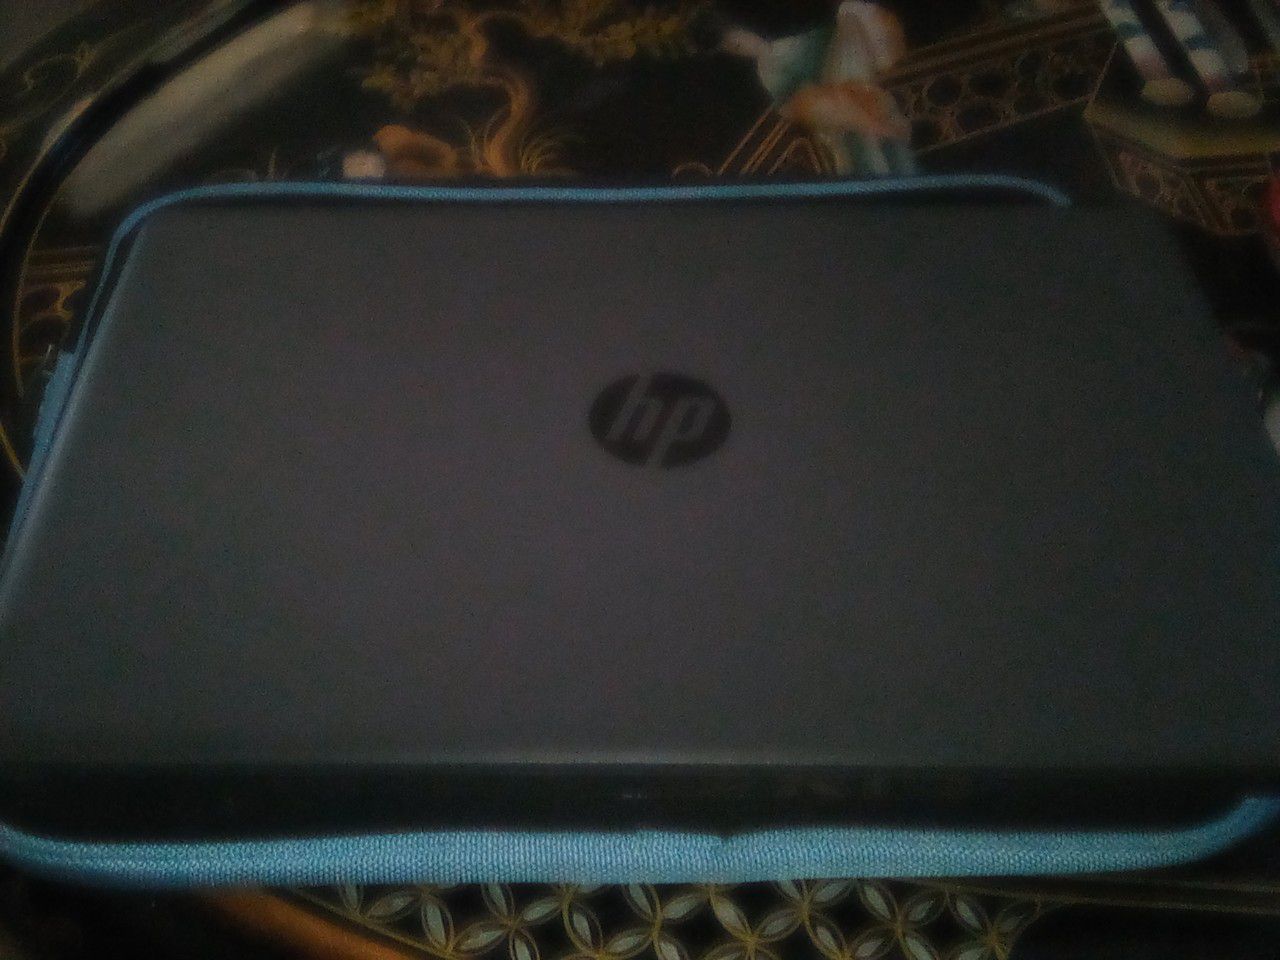 HP laptop HP 255 g7 $100 price is for Sunday only